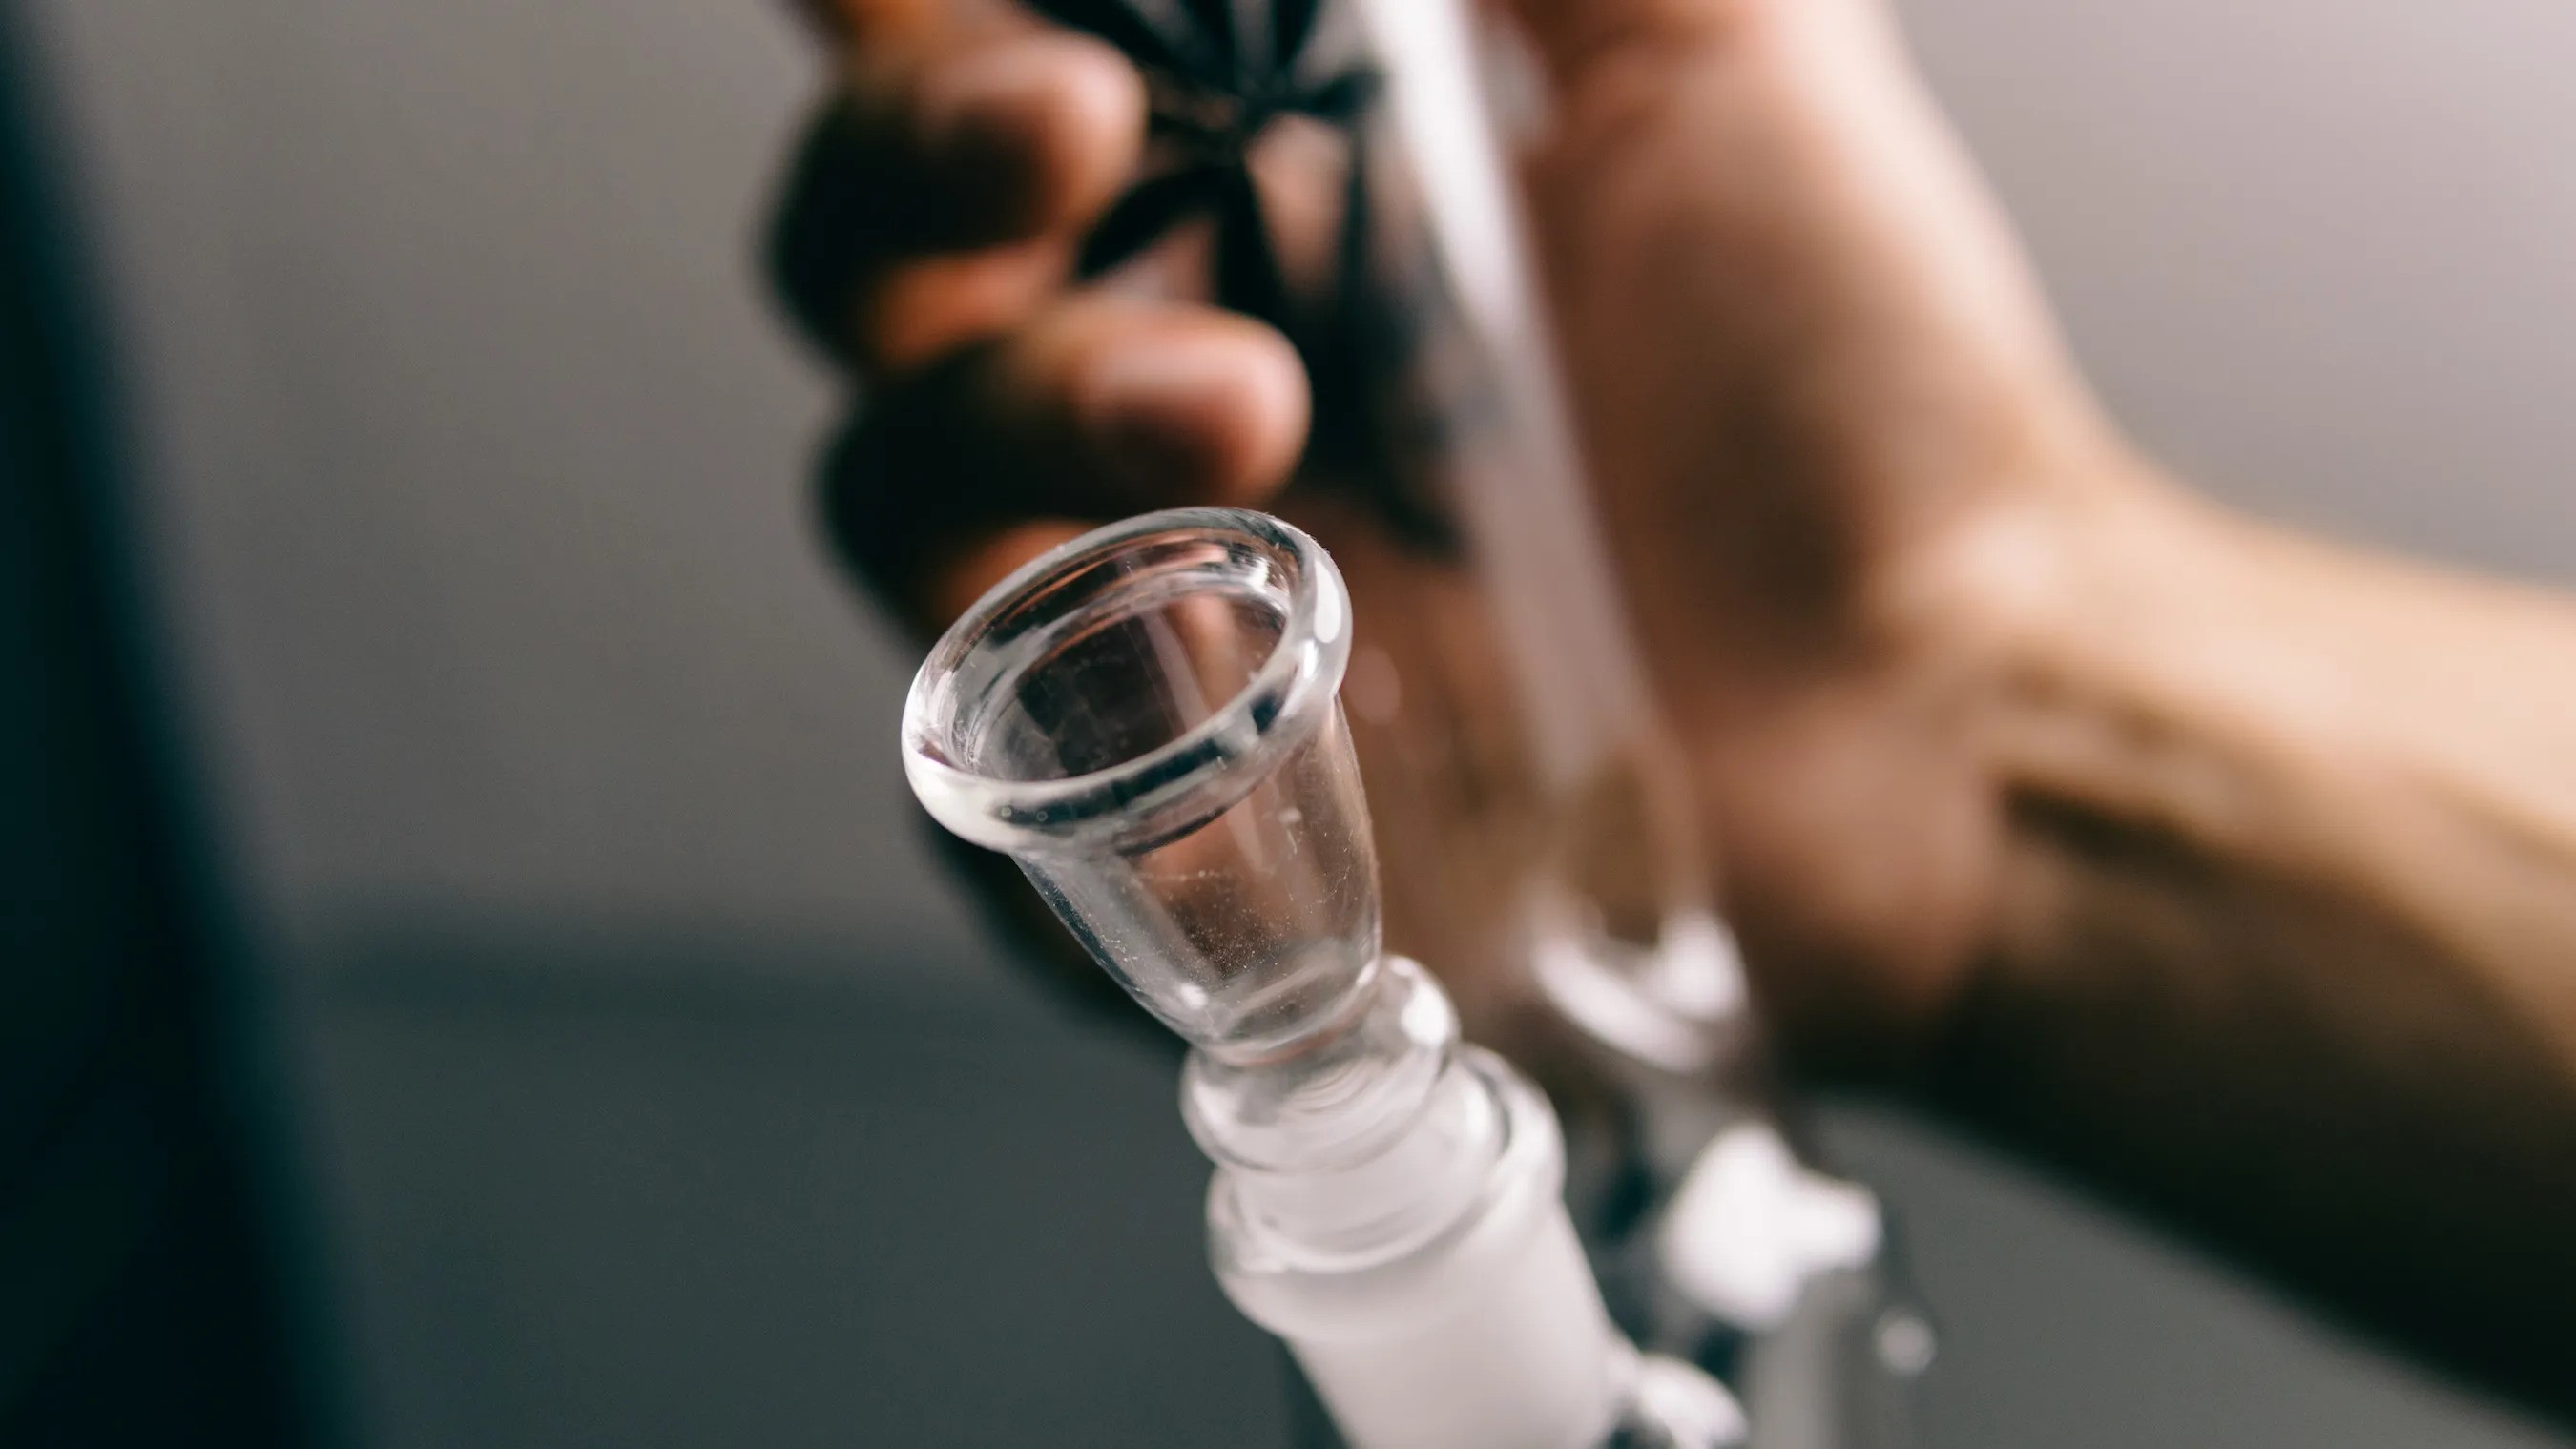 What Is The Fastest Way To Clean A Glass Pipe